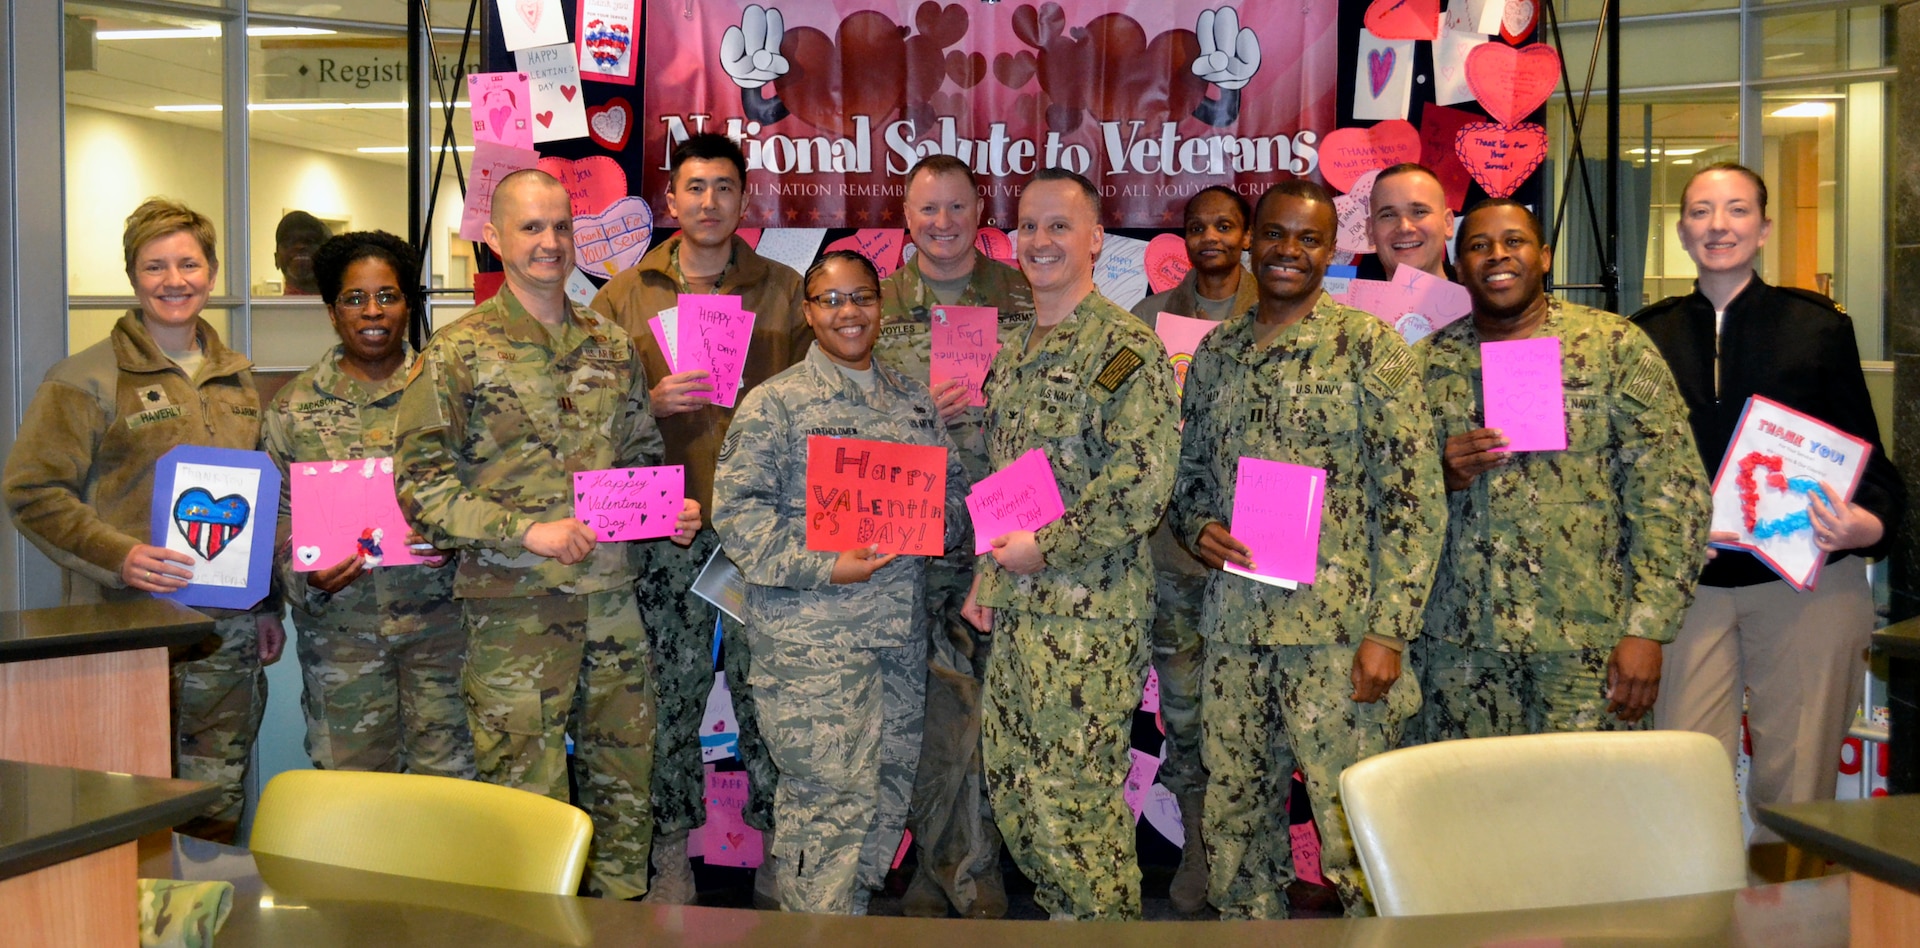 Military members from DLA Troop Support pose for a photo at the Corporal Michael J. Crescenz Veterans Affairs Medical Center, Feb. 11, 2019 in Philadelphia.